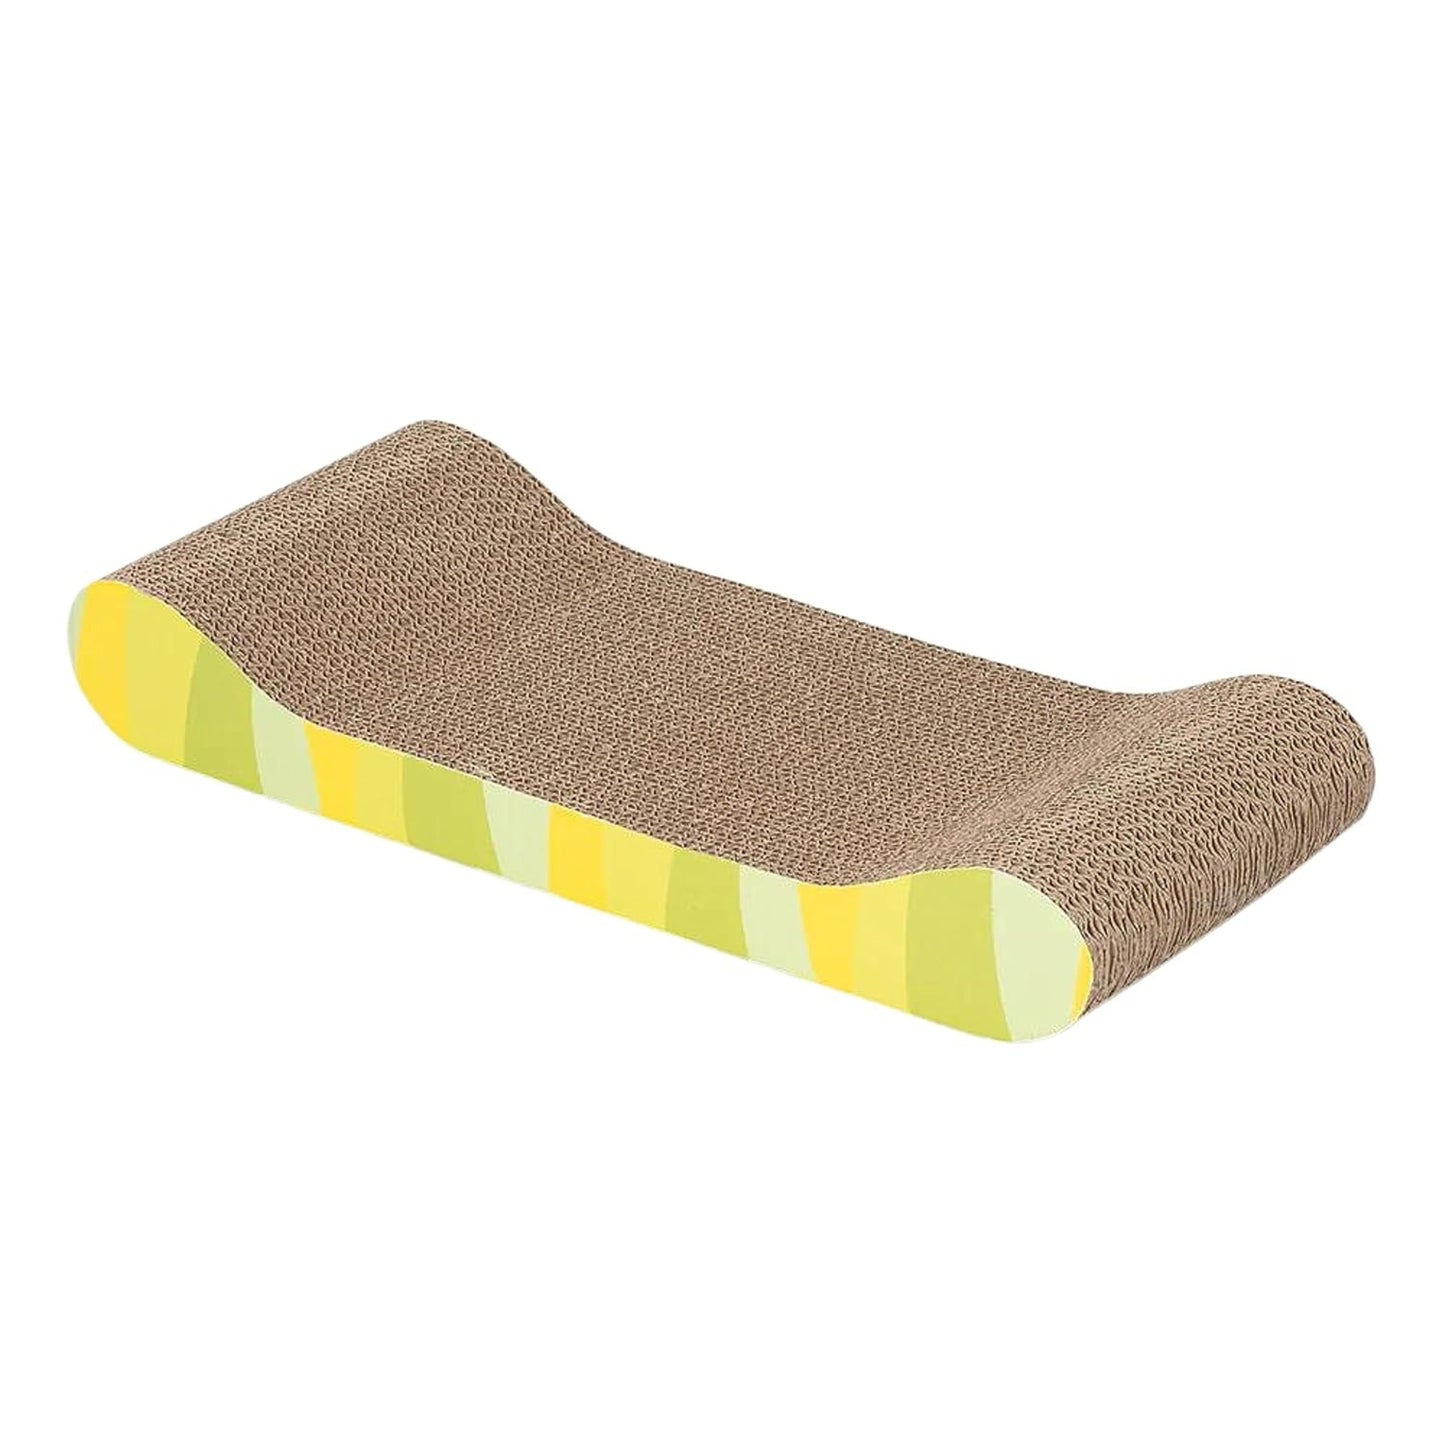 Foodie Puppies Corrugated Couch Scratcher for Cats & Kittens